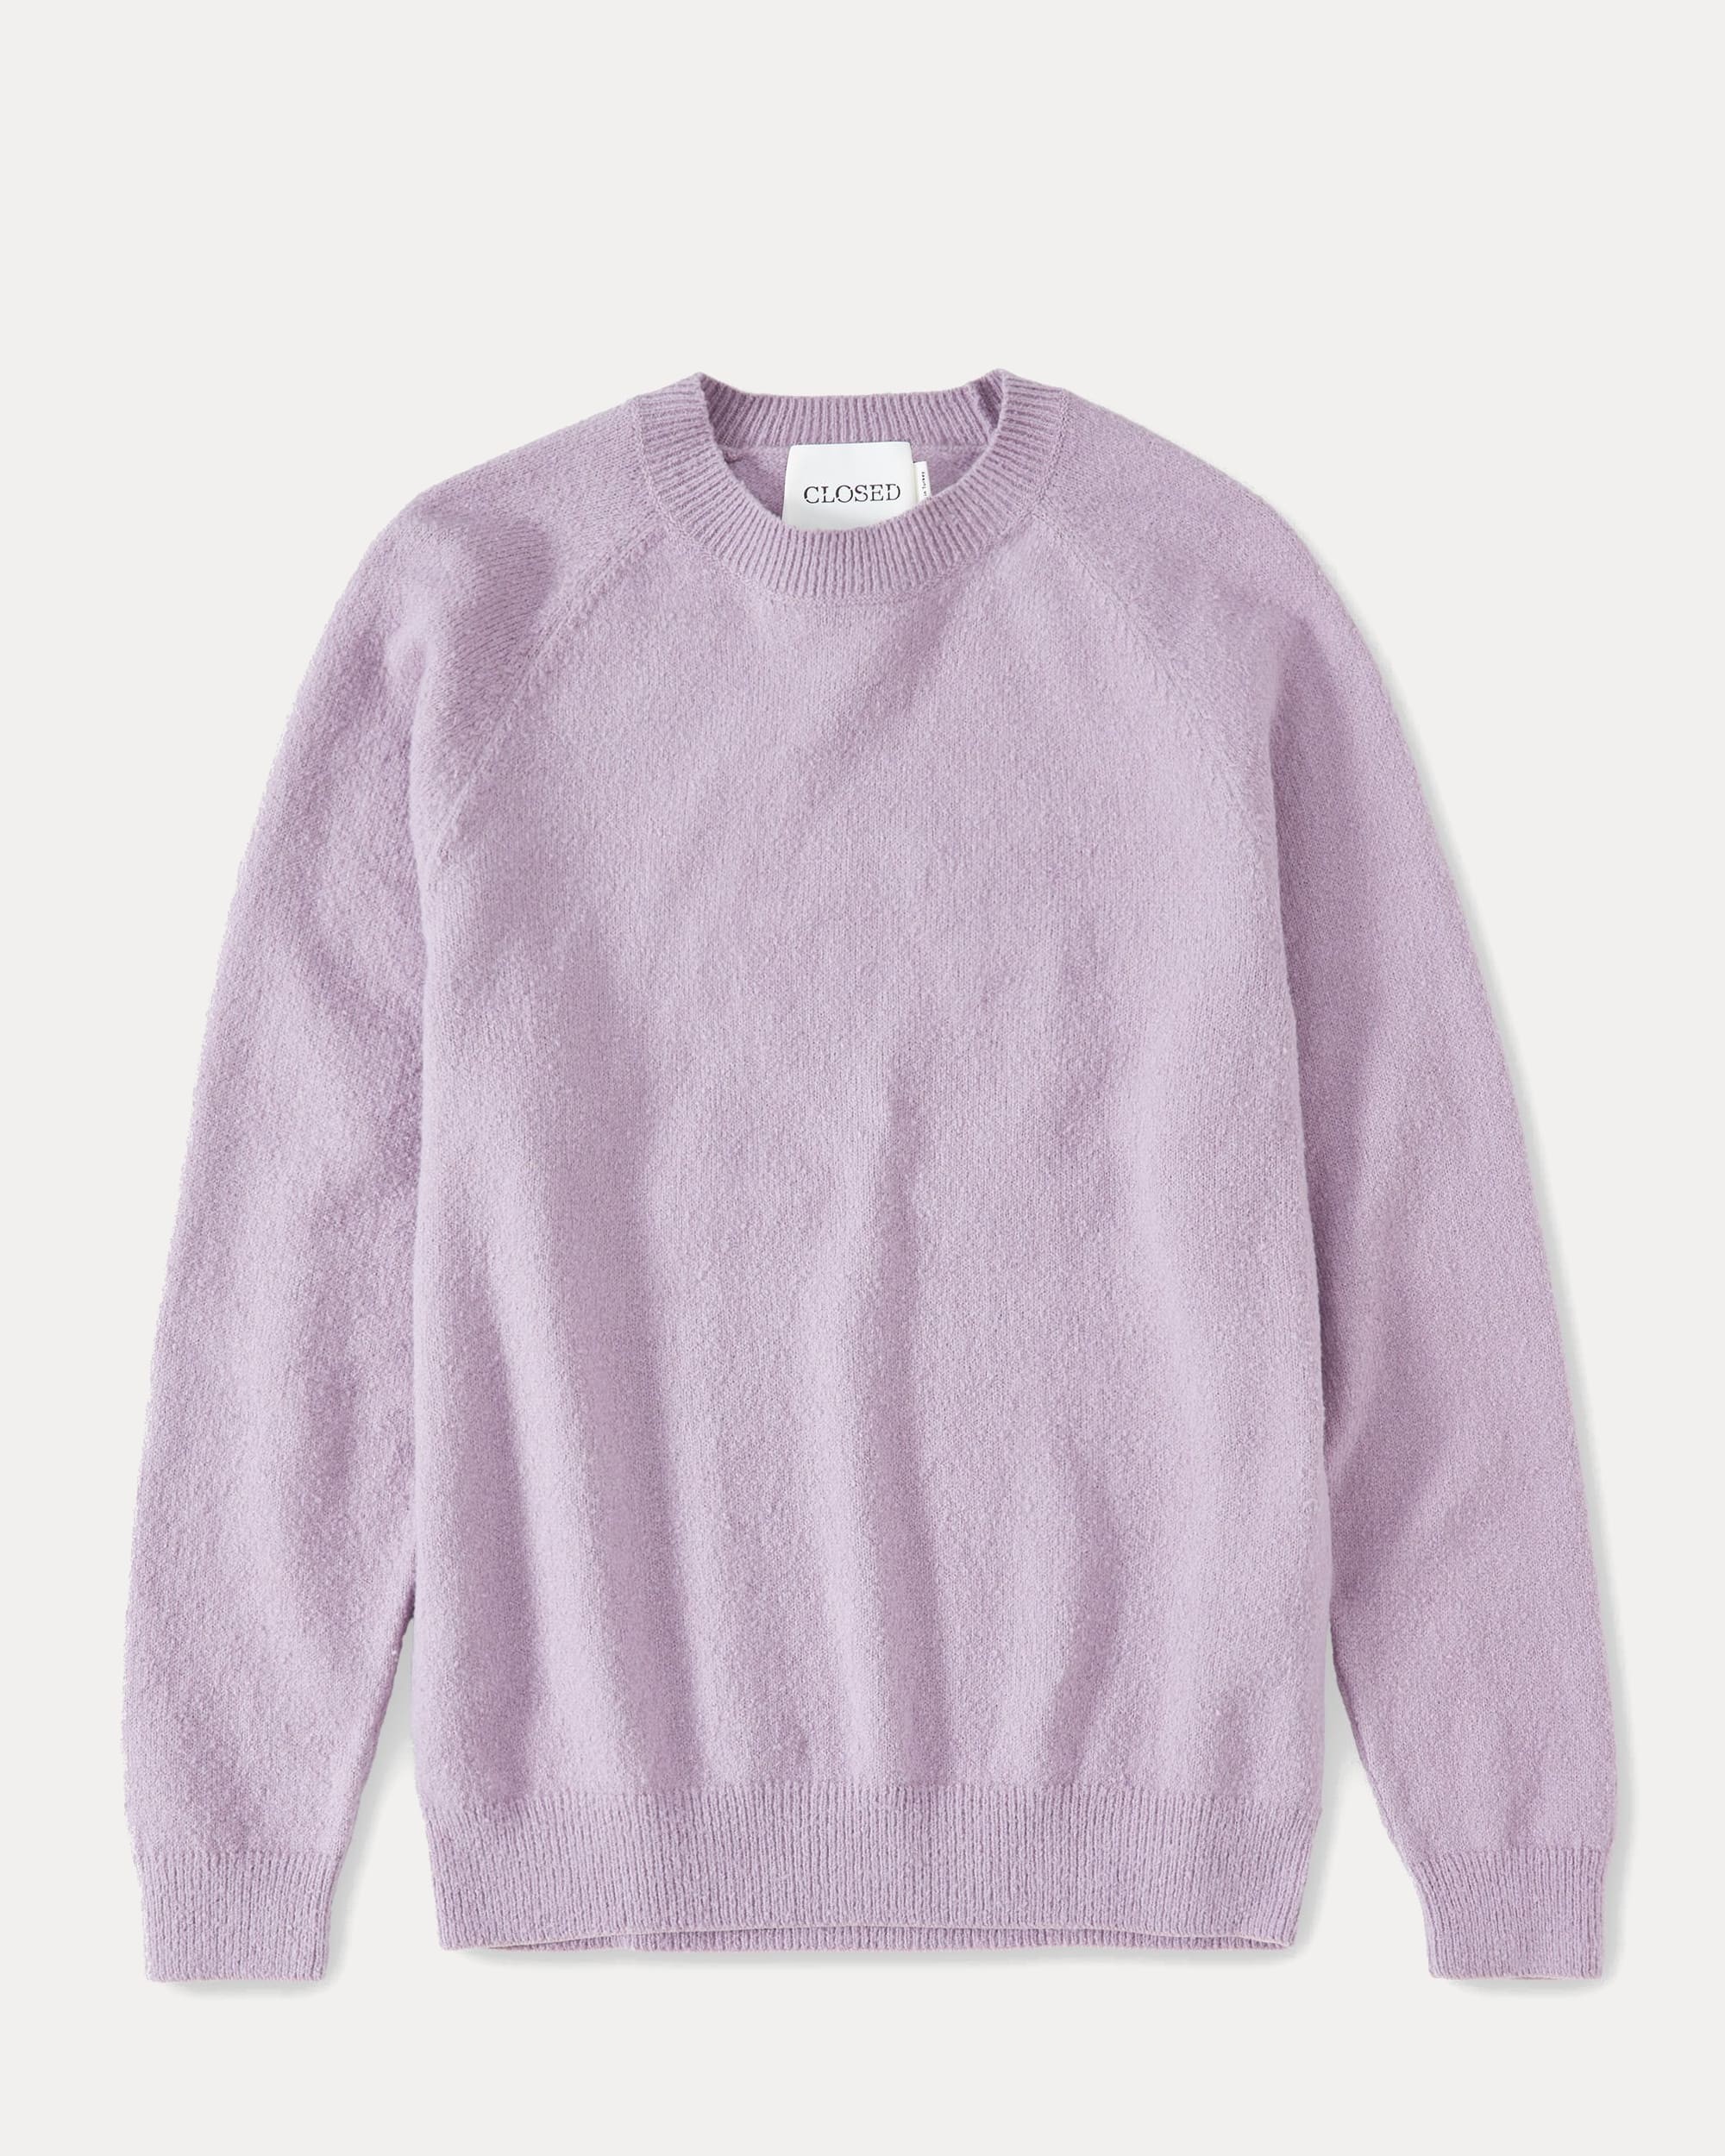 closed-closed-pull-coton-dusty-violet